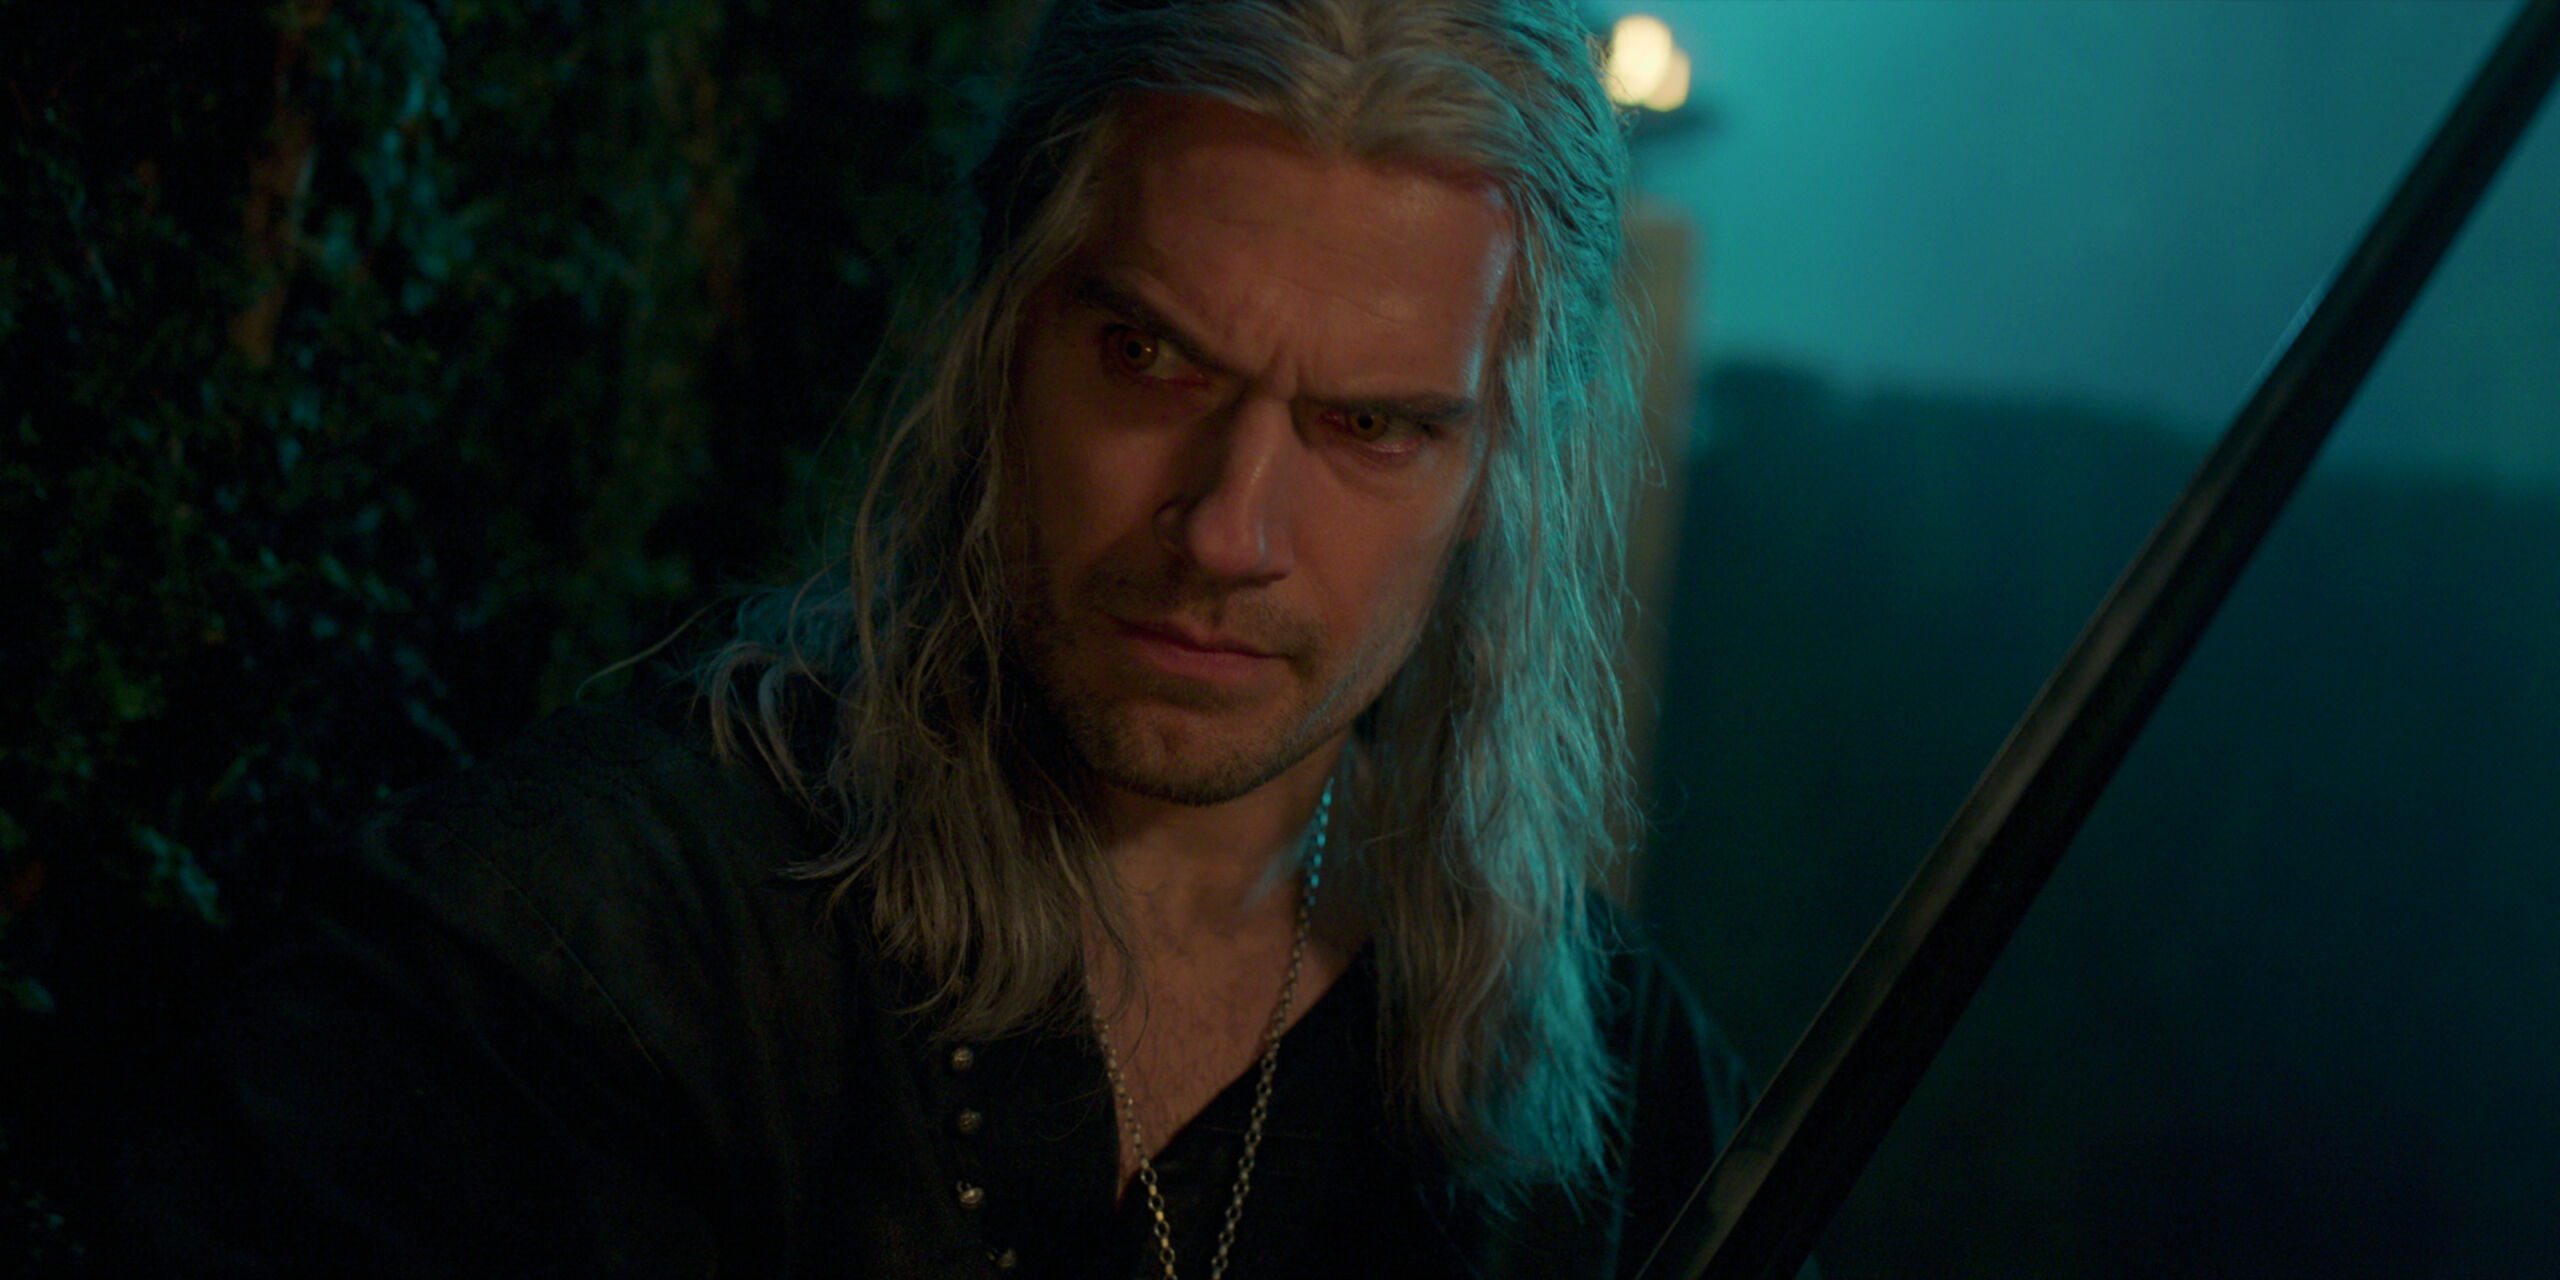 Why Did Henry Cavill Leave 'The Witcher'?